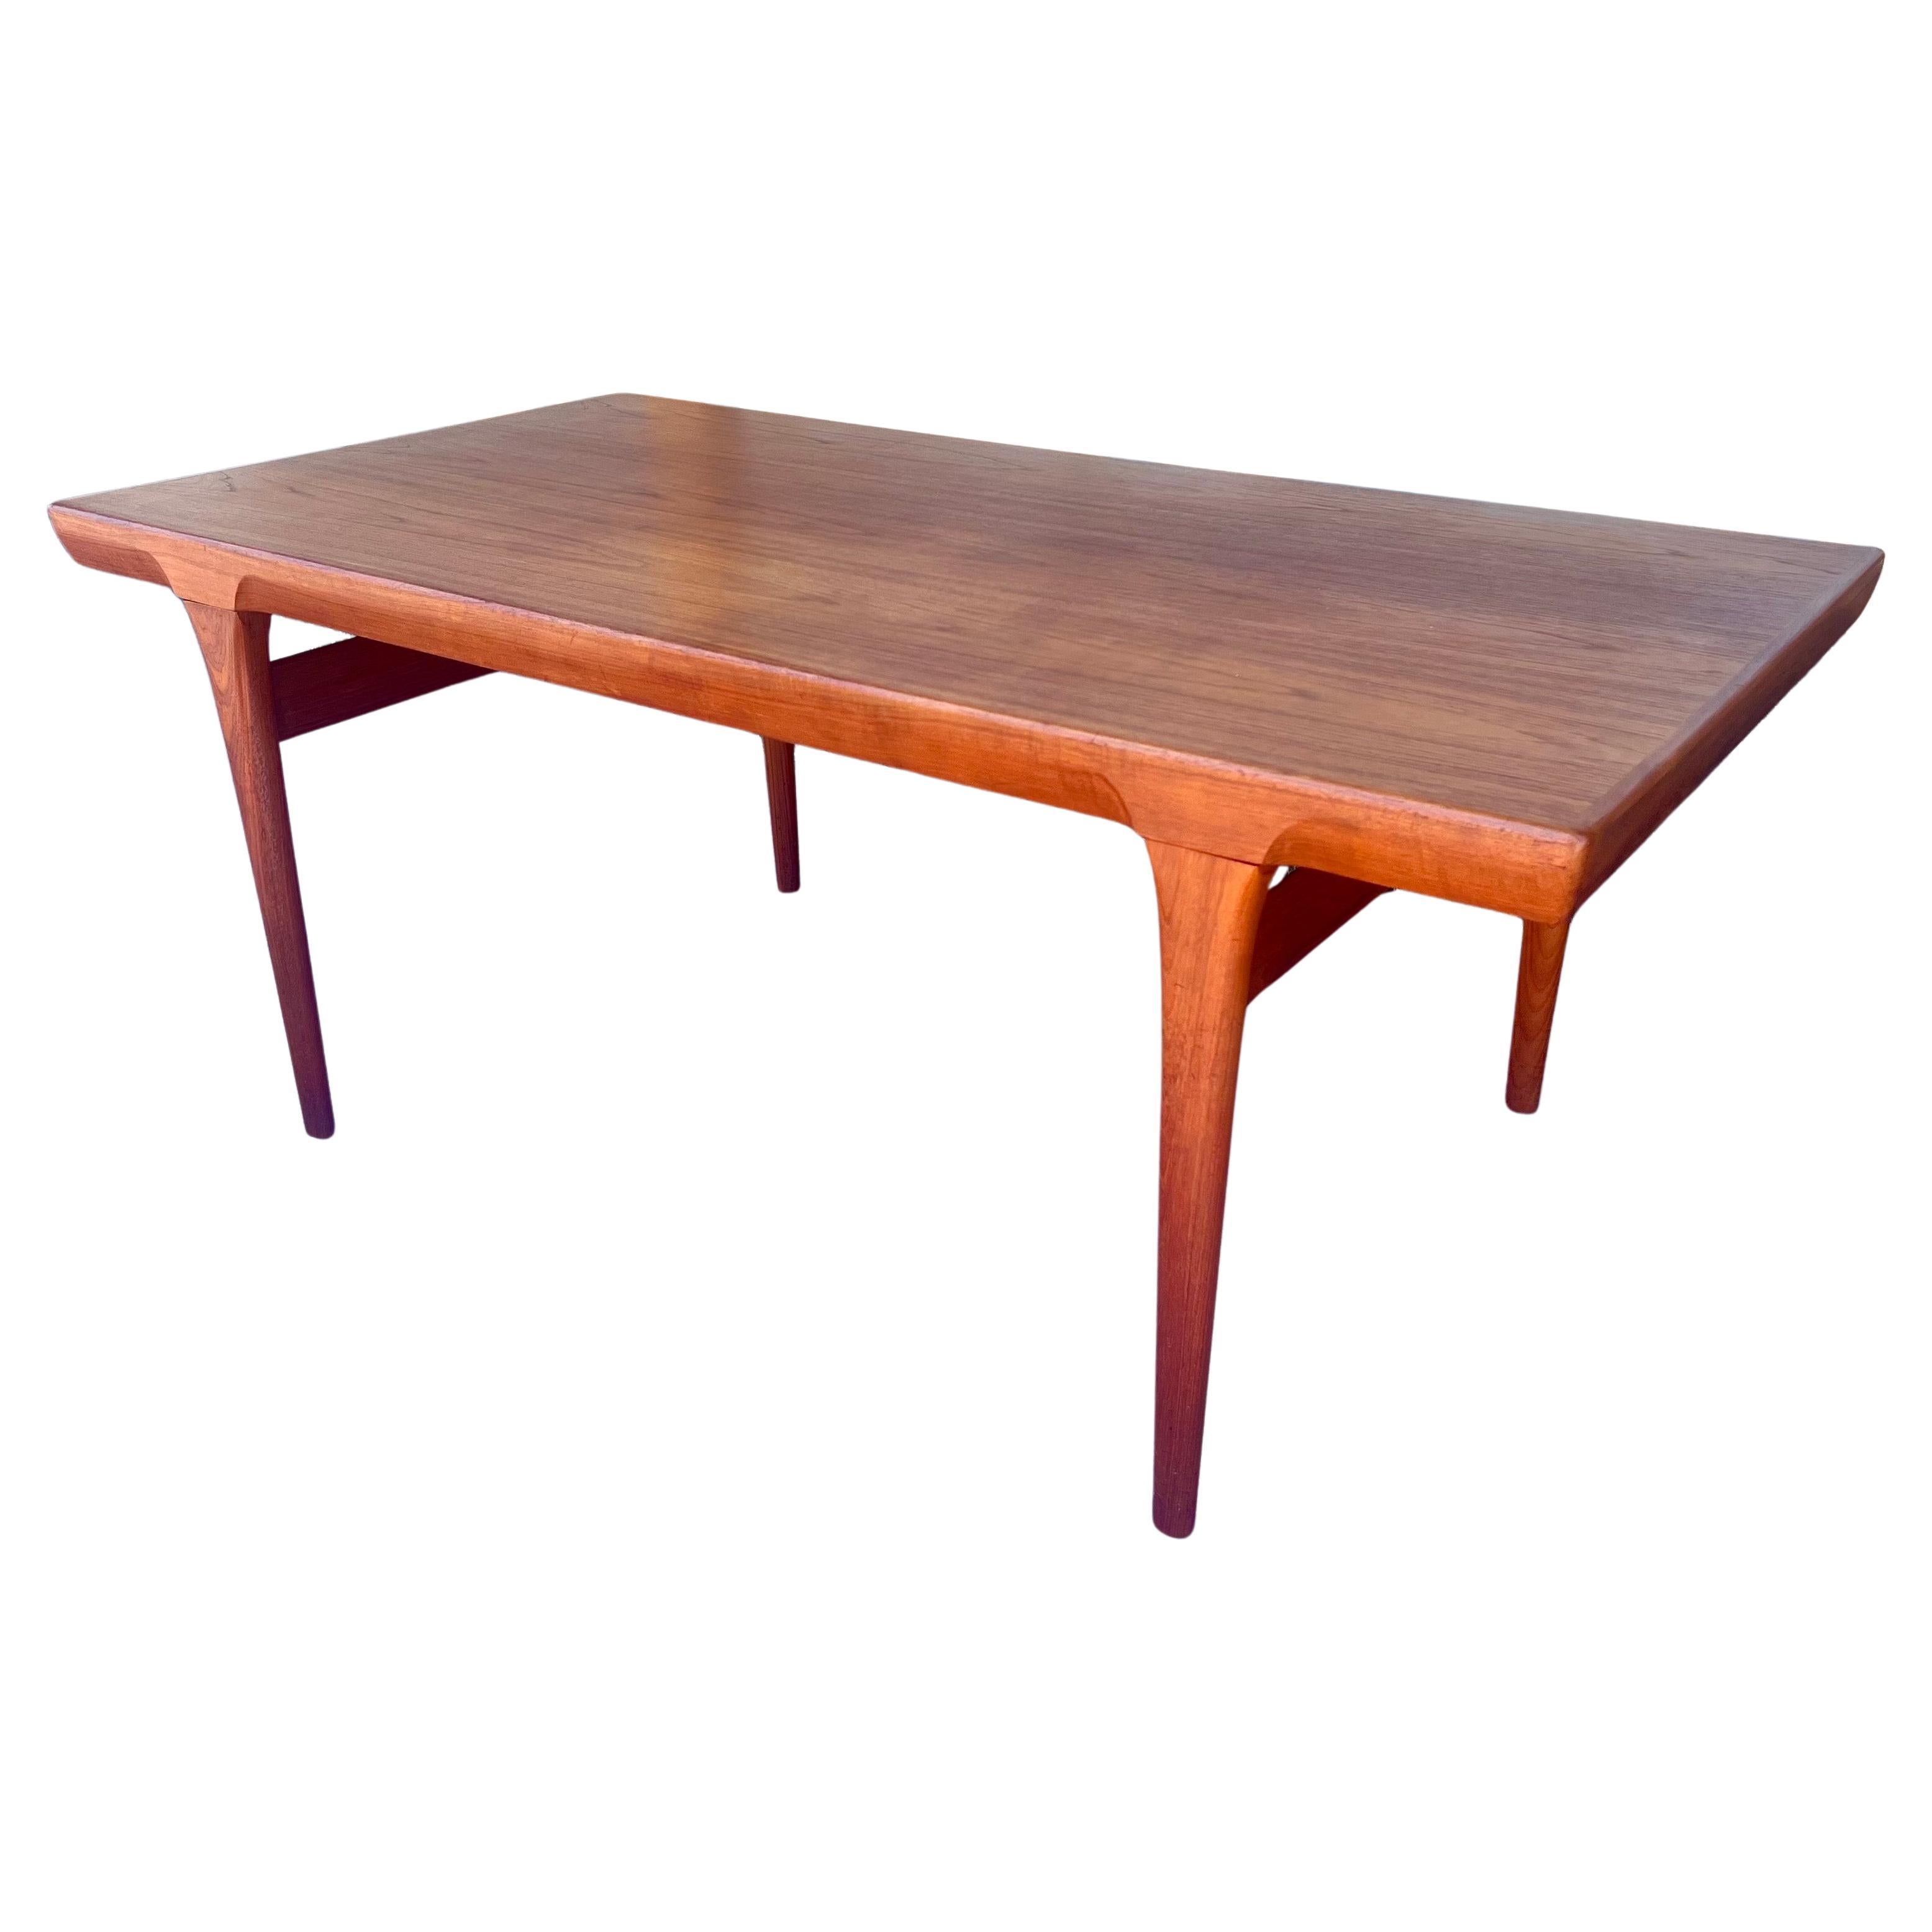 Danish Modern Teak Dining Table With 2 Pull-out Leaves by Johannes Andersen